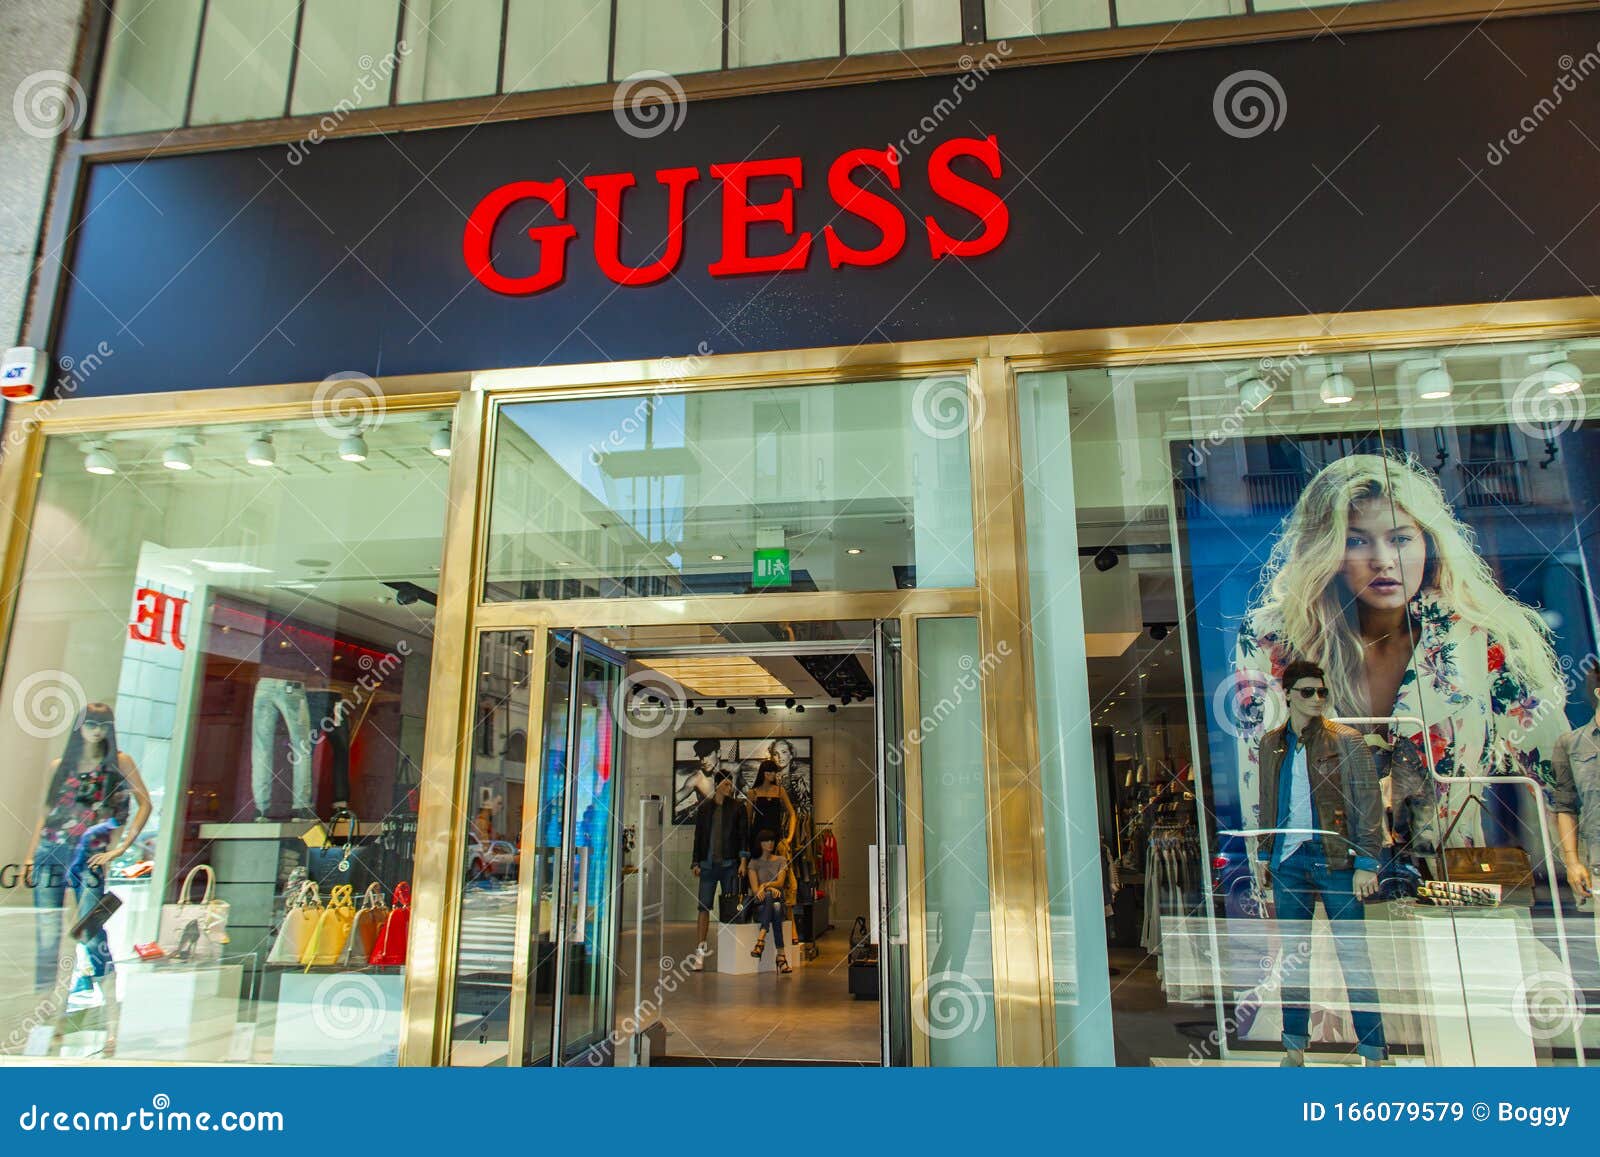 Guess store editorial stock image. Image of europe, company - 166079579